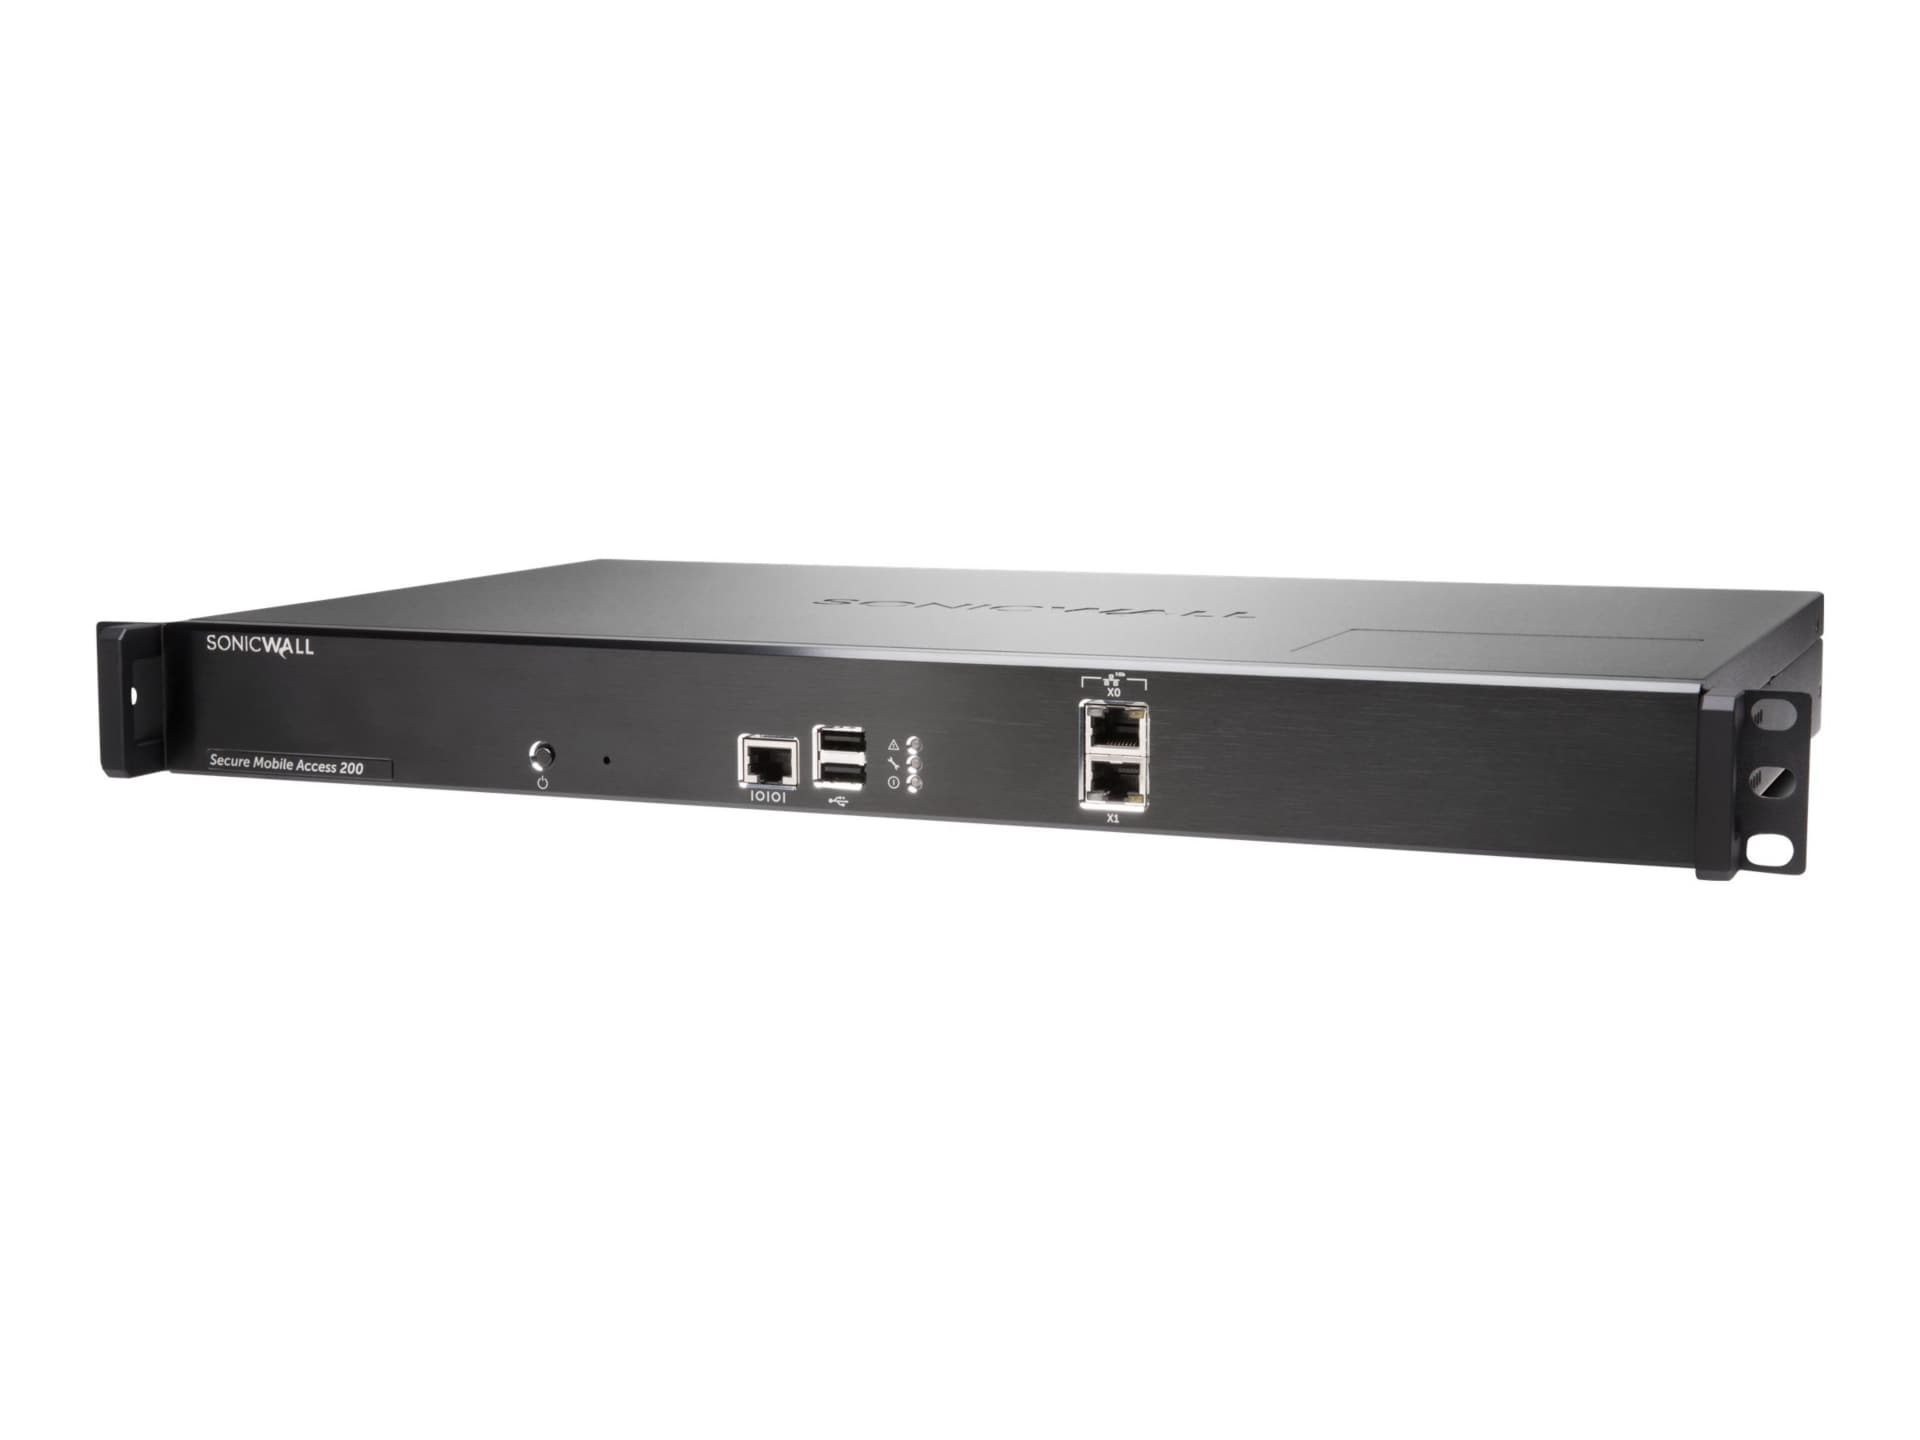 SonicWall Secure Mobile Access 210 - security appliance - with 3 years 24x7 Support